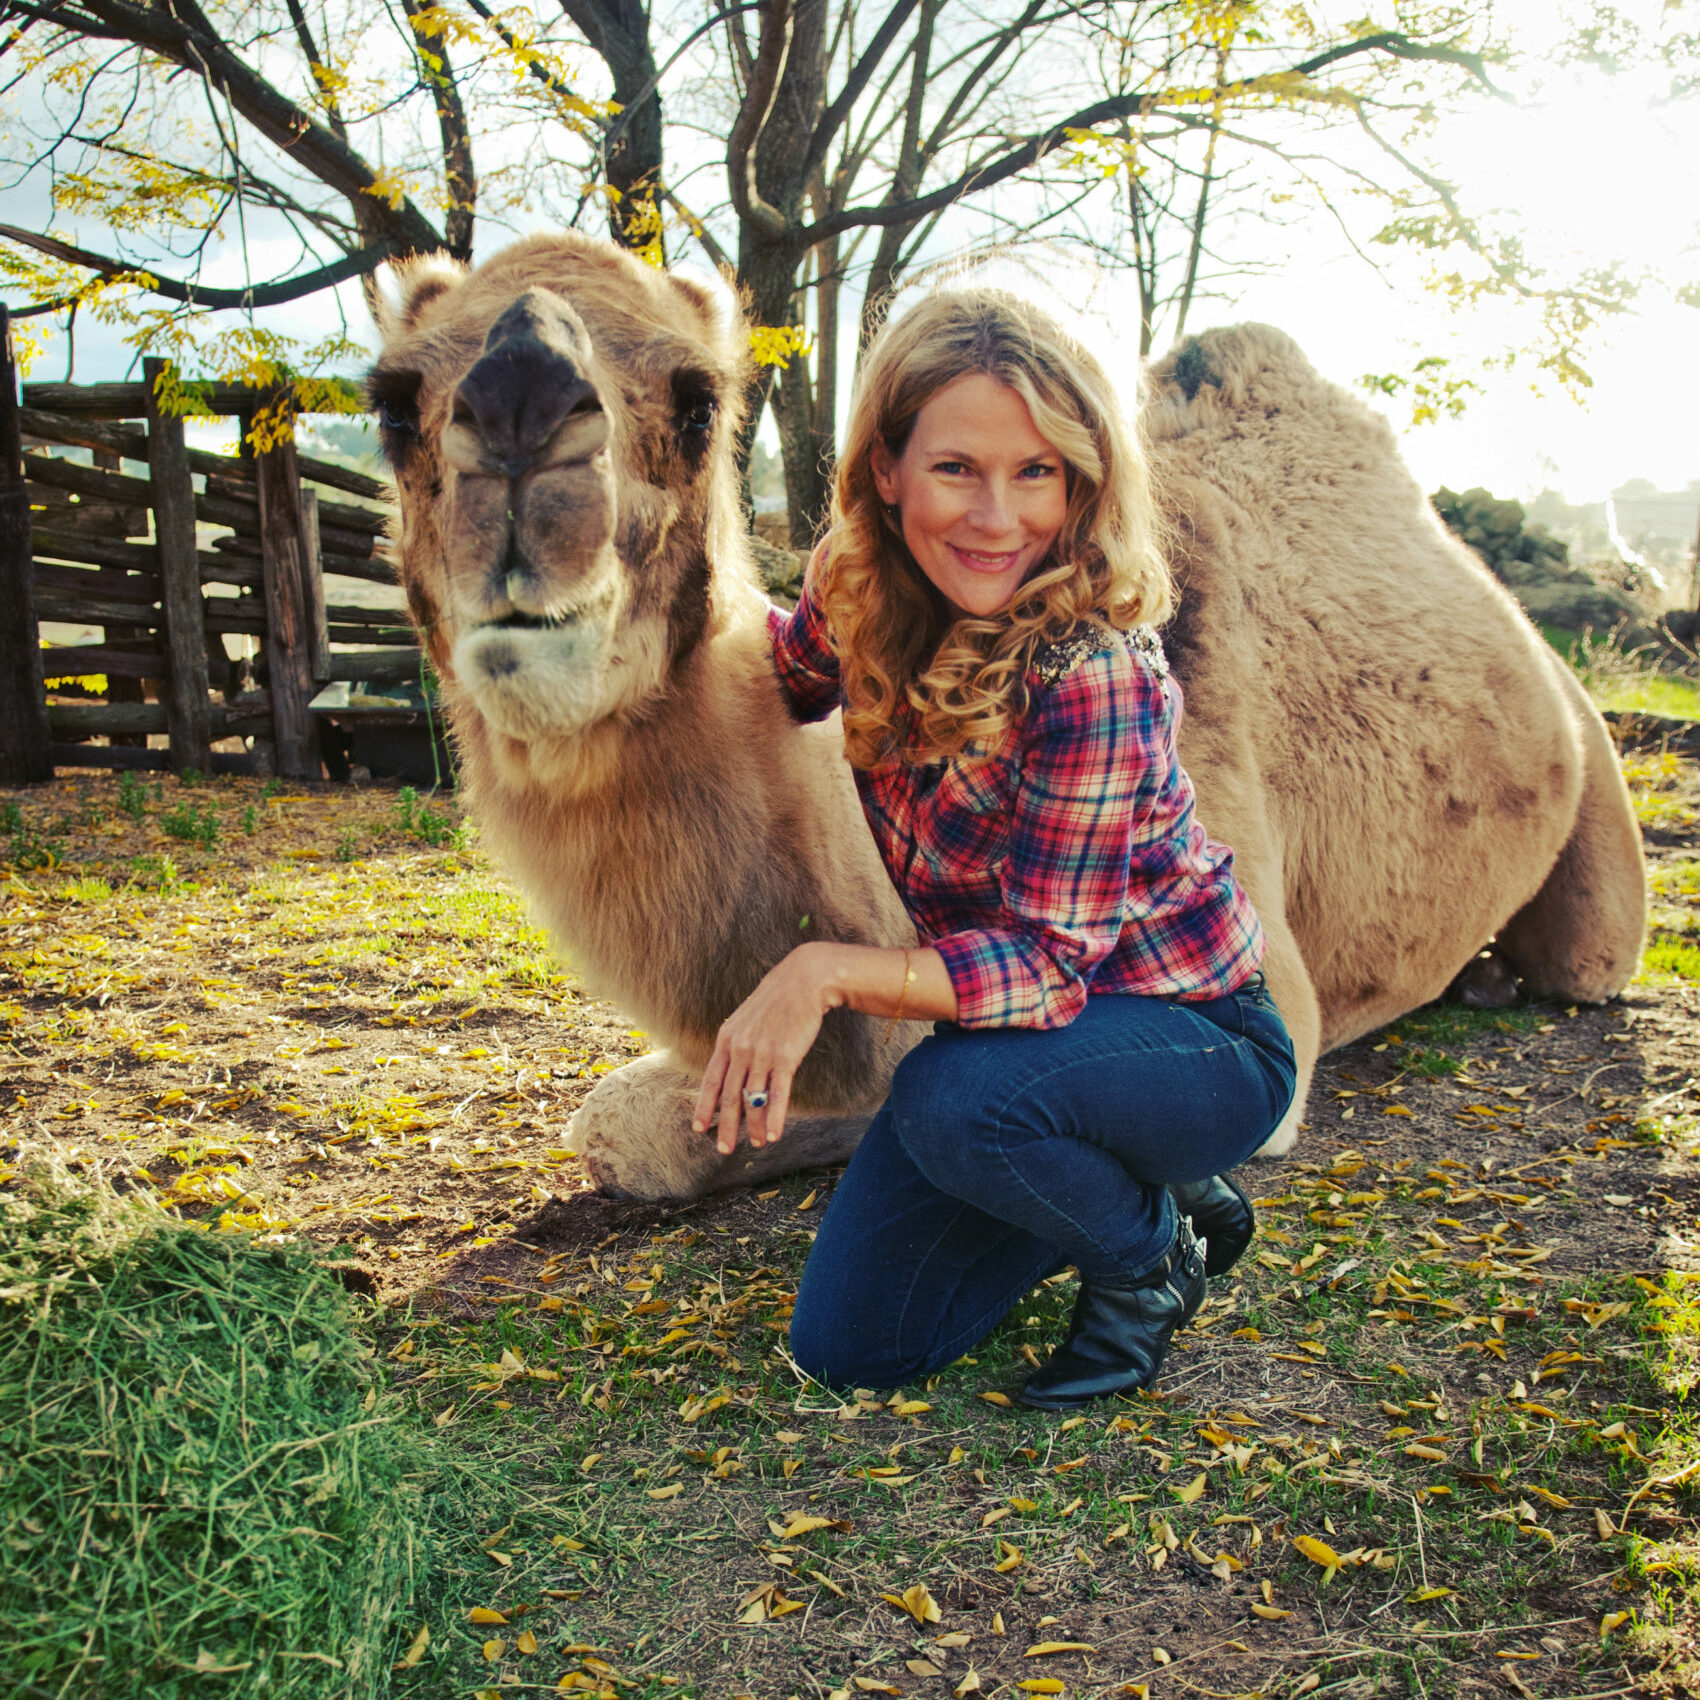 Christina Adams posing with a camel on the ground